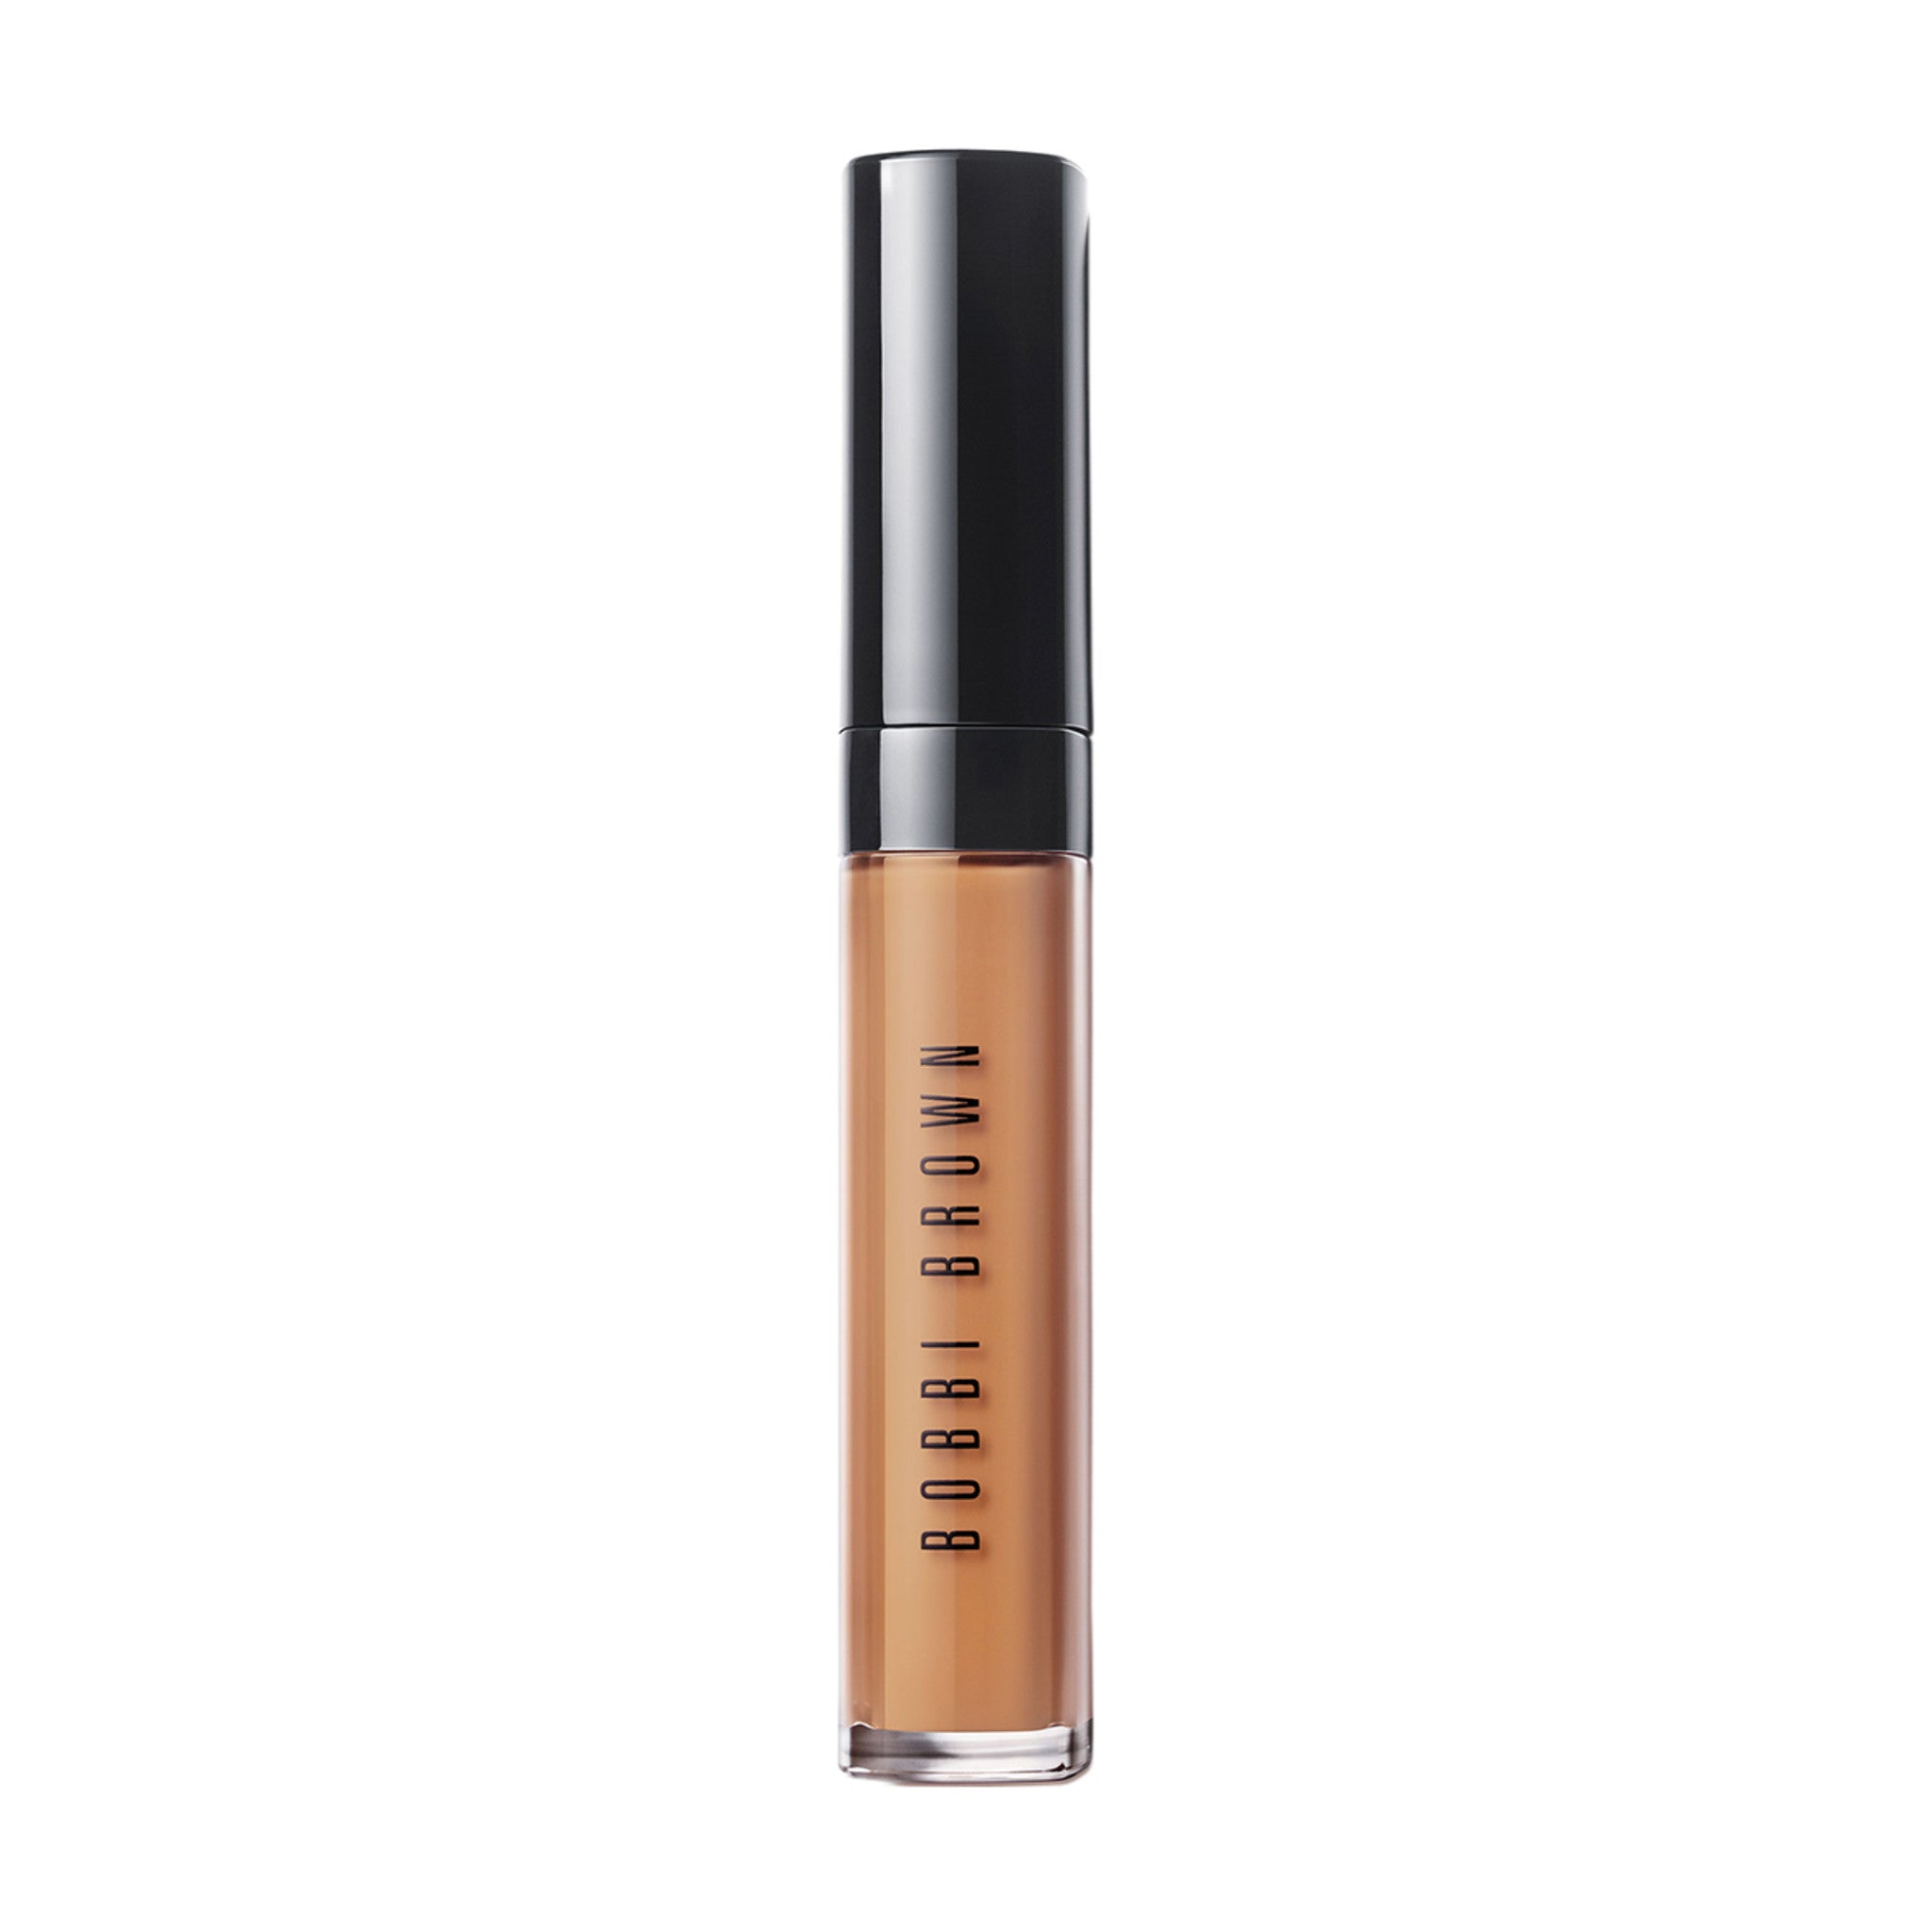 Bobbi Brown Instant Full Cover Concealer Color/Shade variant: Natural main image. This product is for medium warm golden complexions